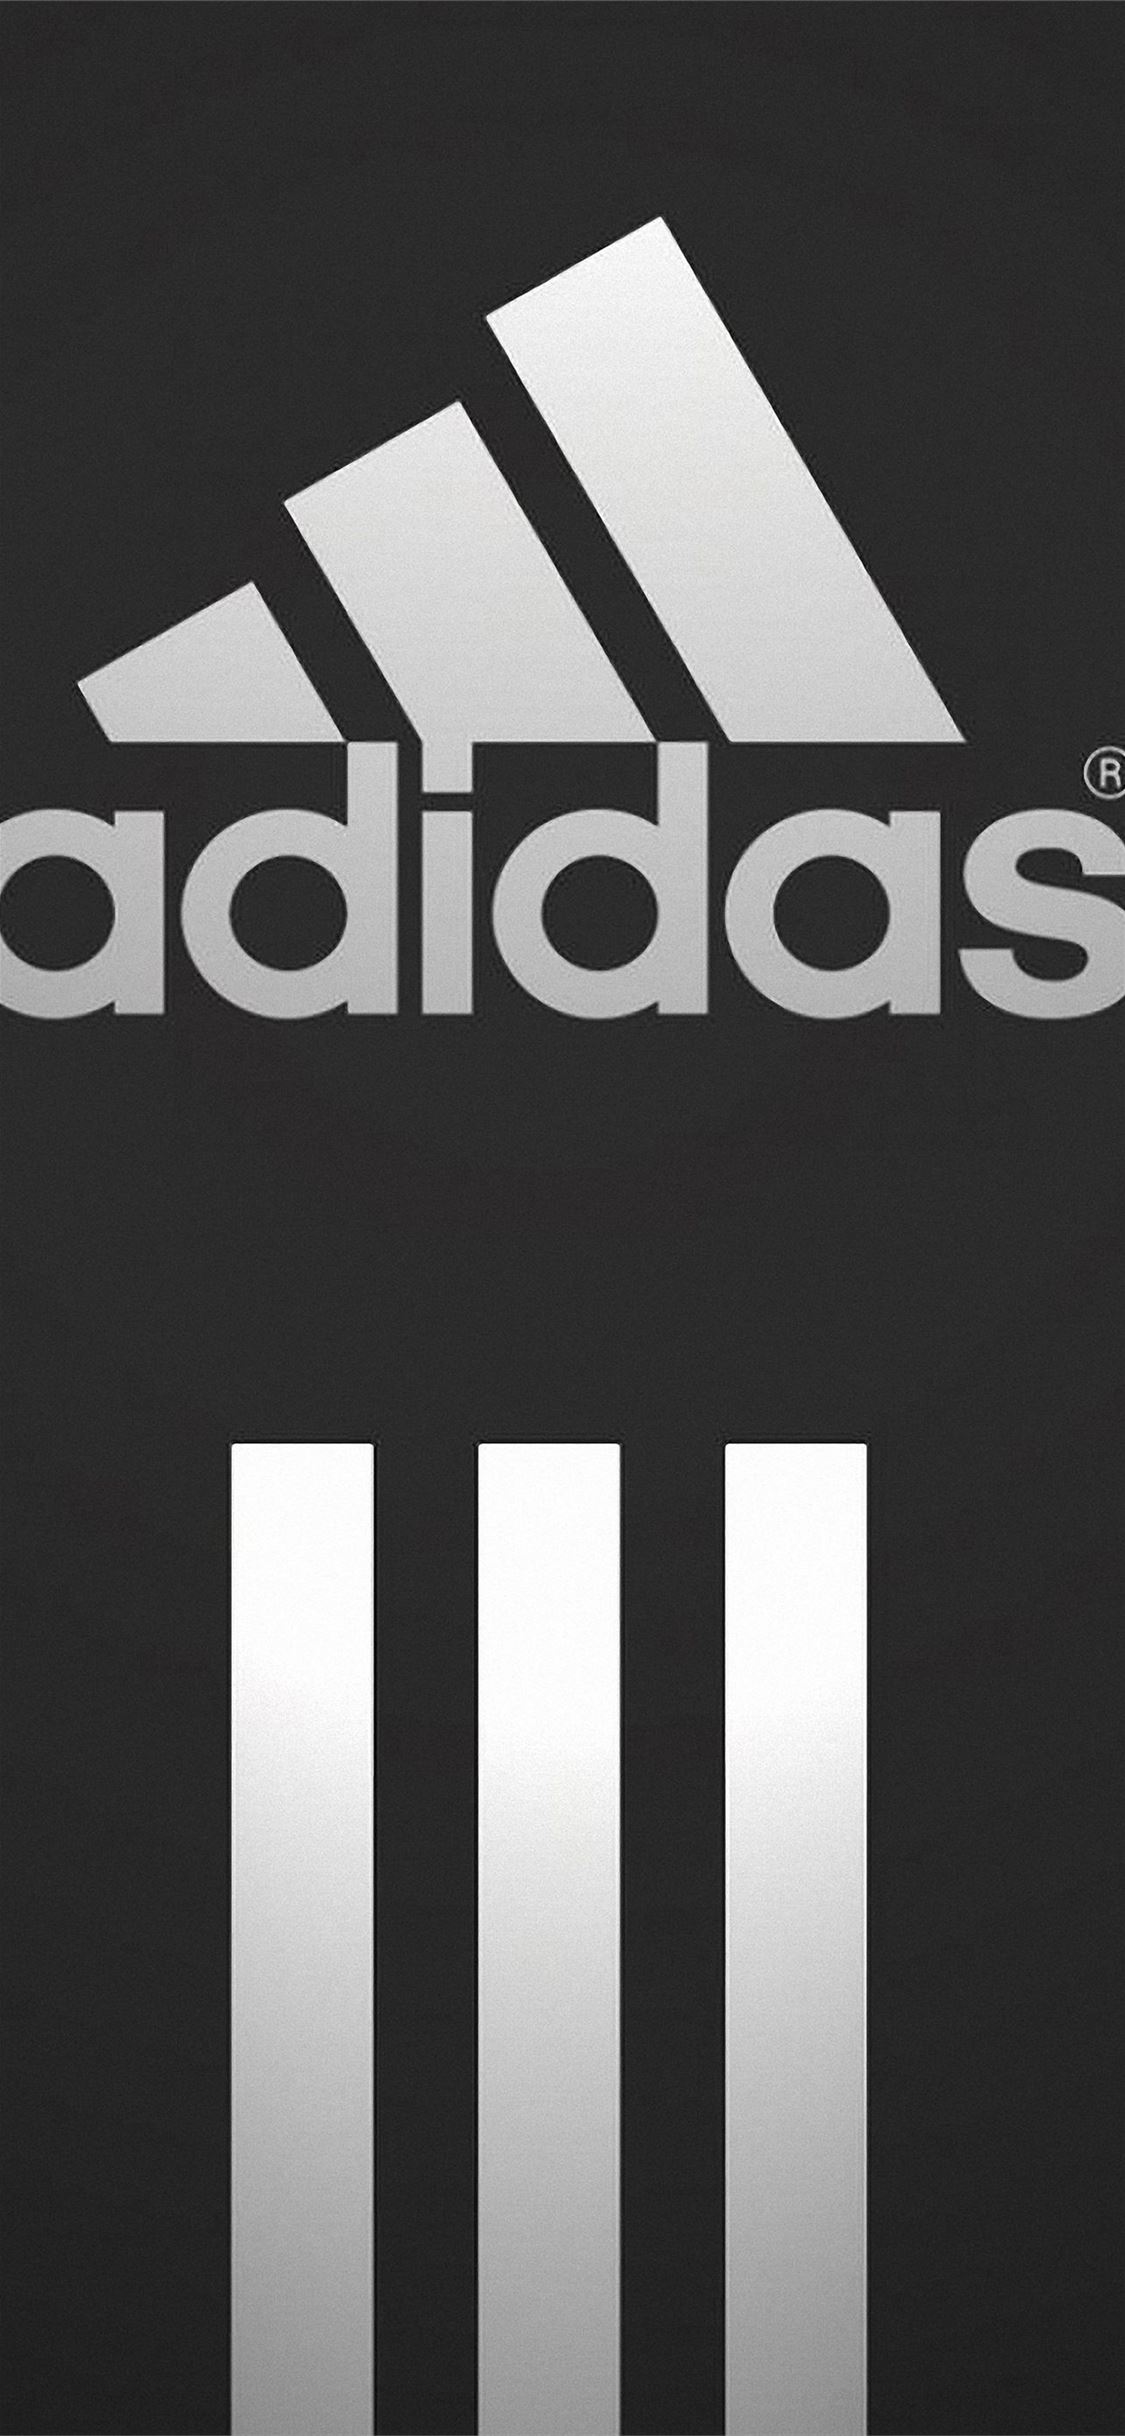 Galaxy Adidas Desktop on iPhone Wallpapers Free Download